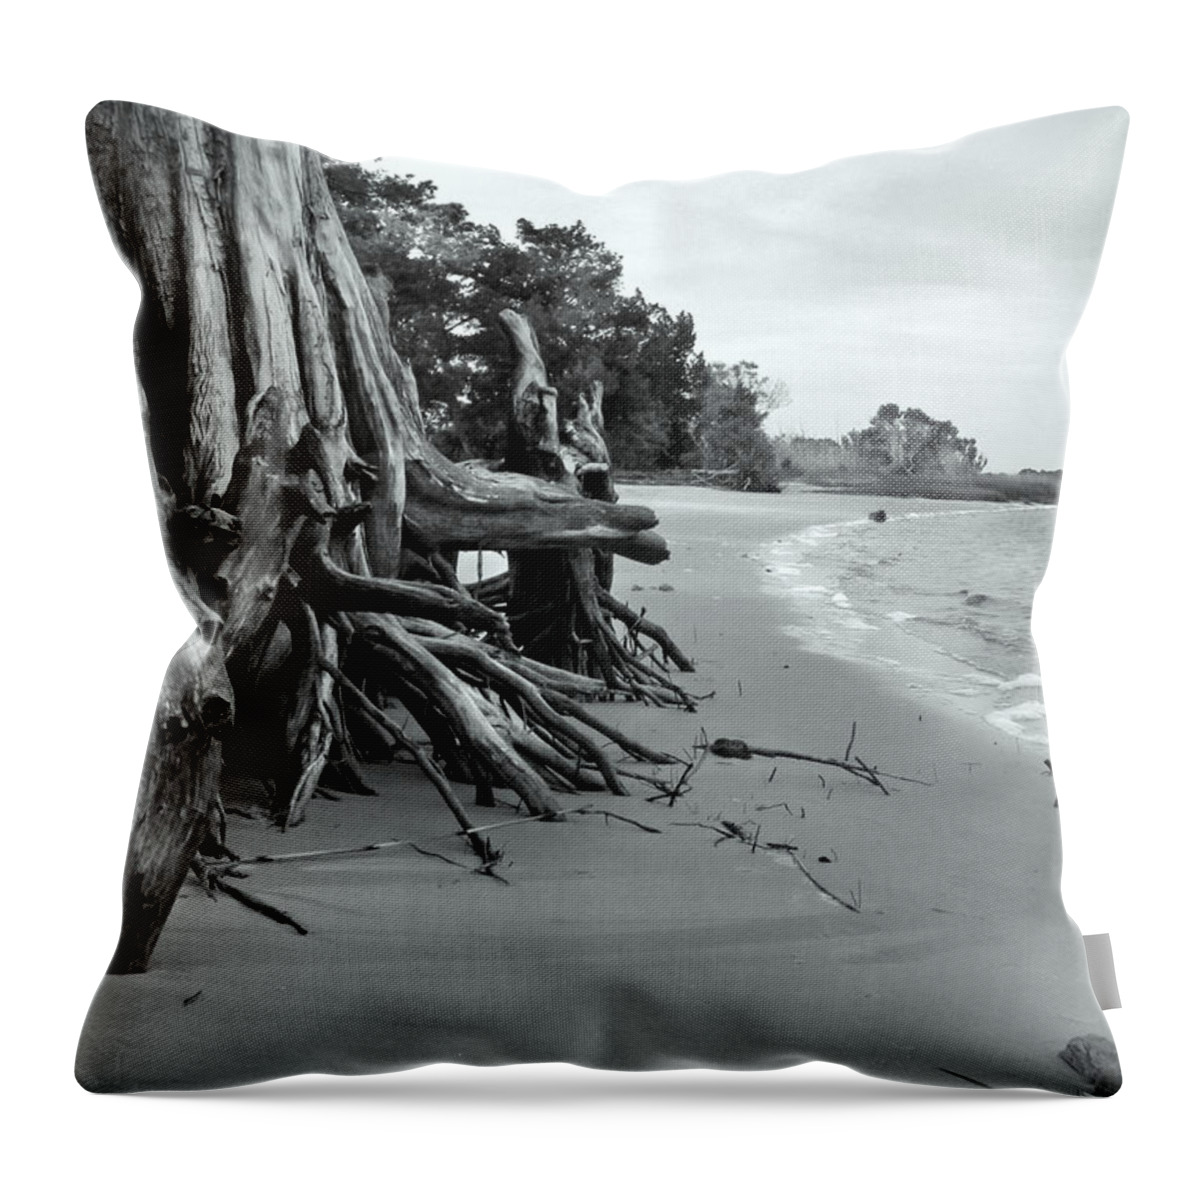 Landscape Throw Pillow featuring the photograph Cypress Bay by Deborah Smith